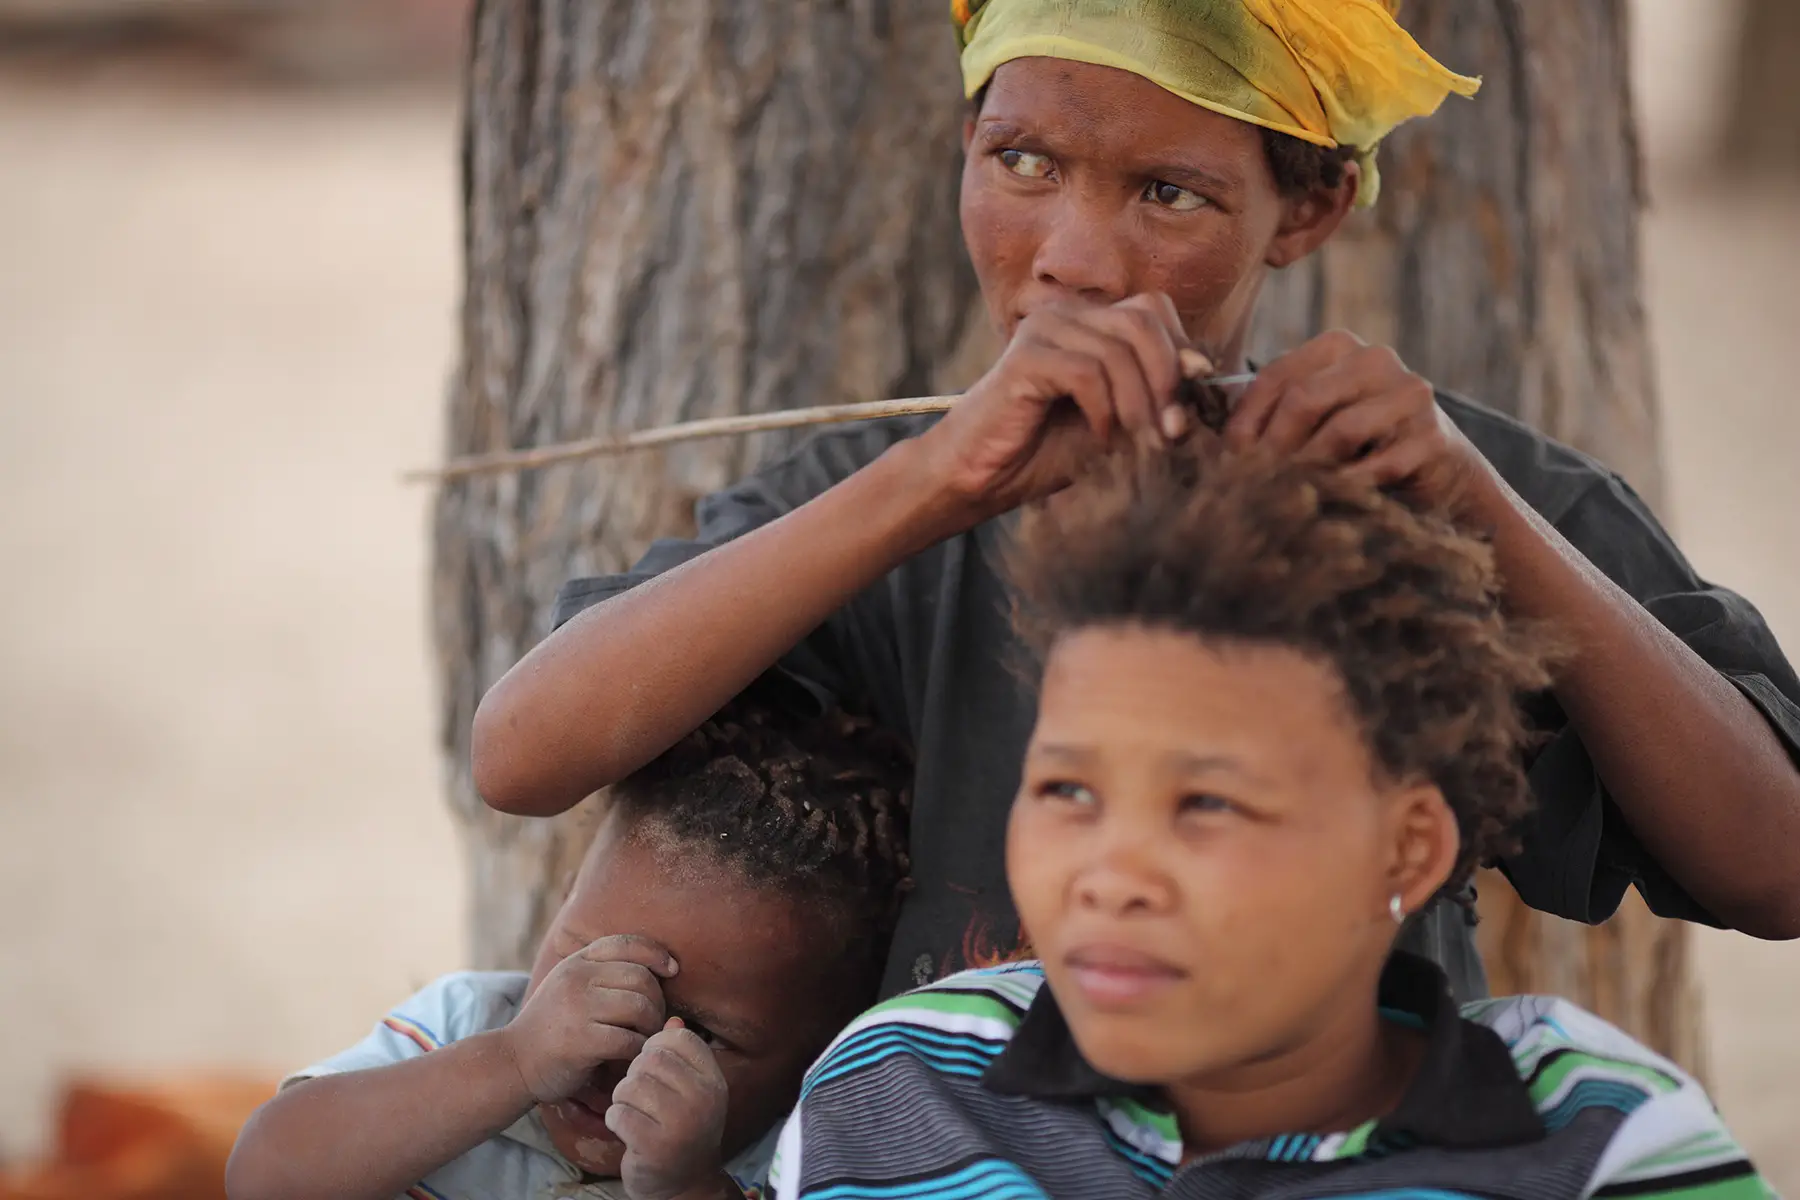 A San Bushwomen from the Khomani San community styles a young girls hair in the Southern Kalahari Desert. A young child sits next to them.